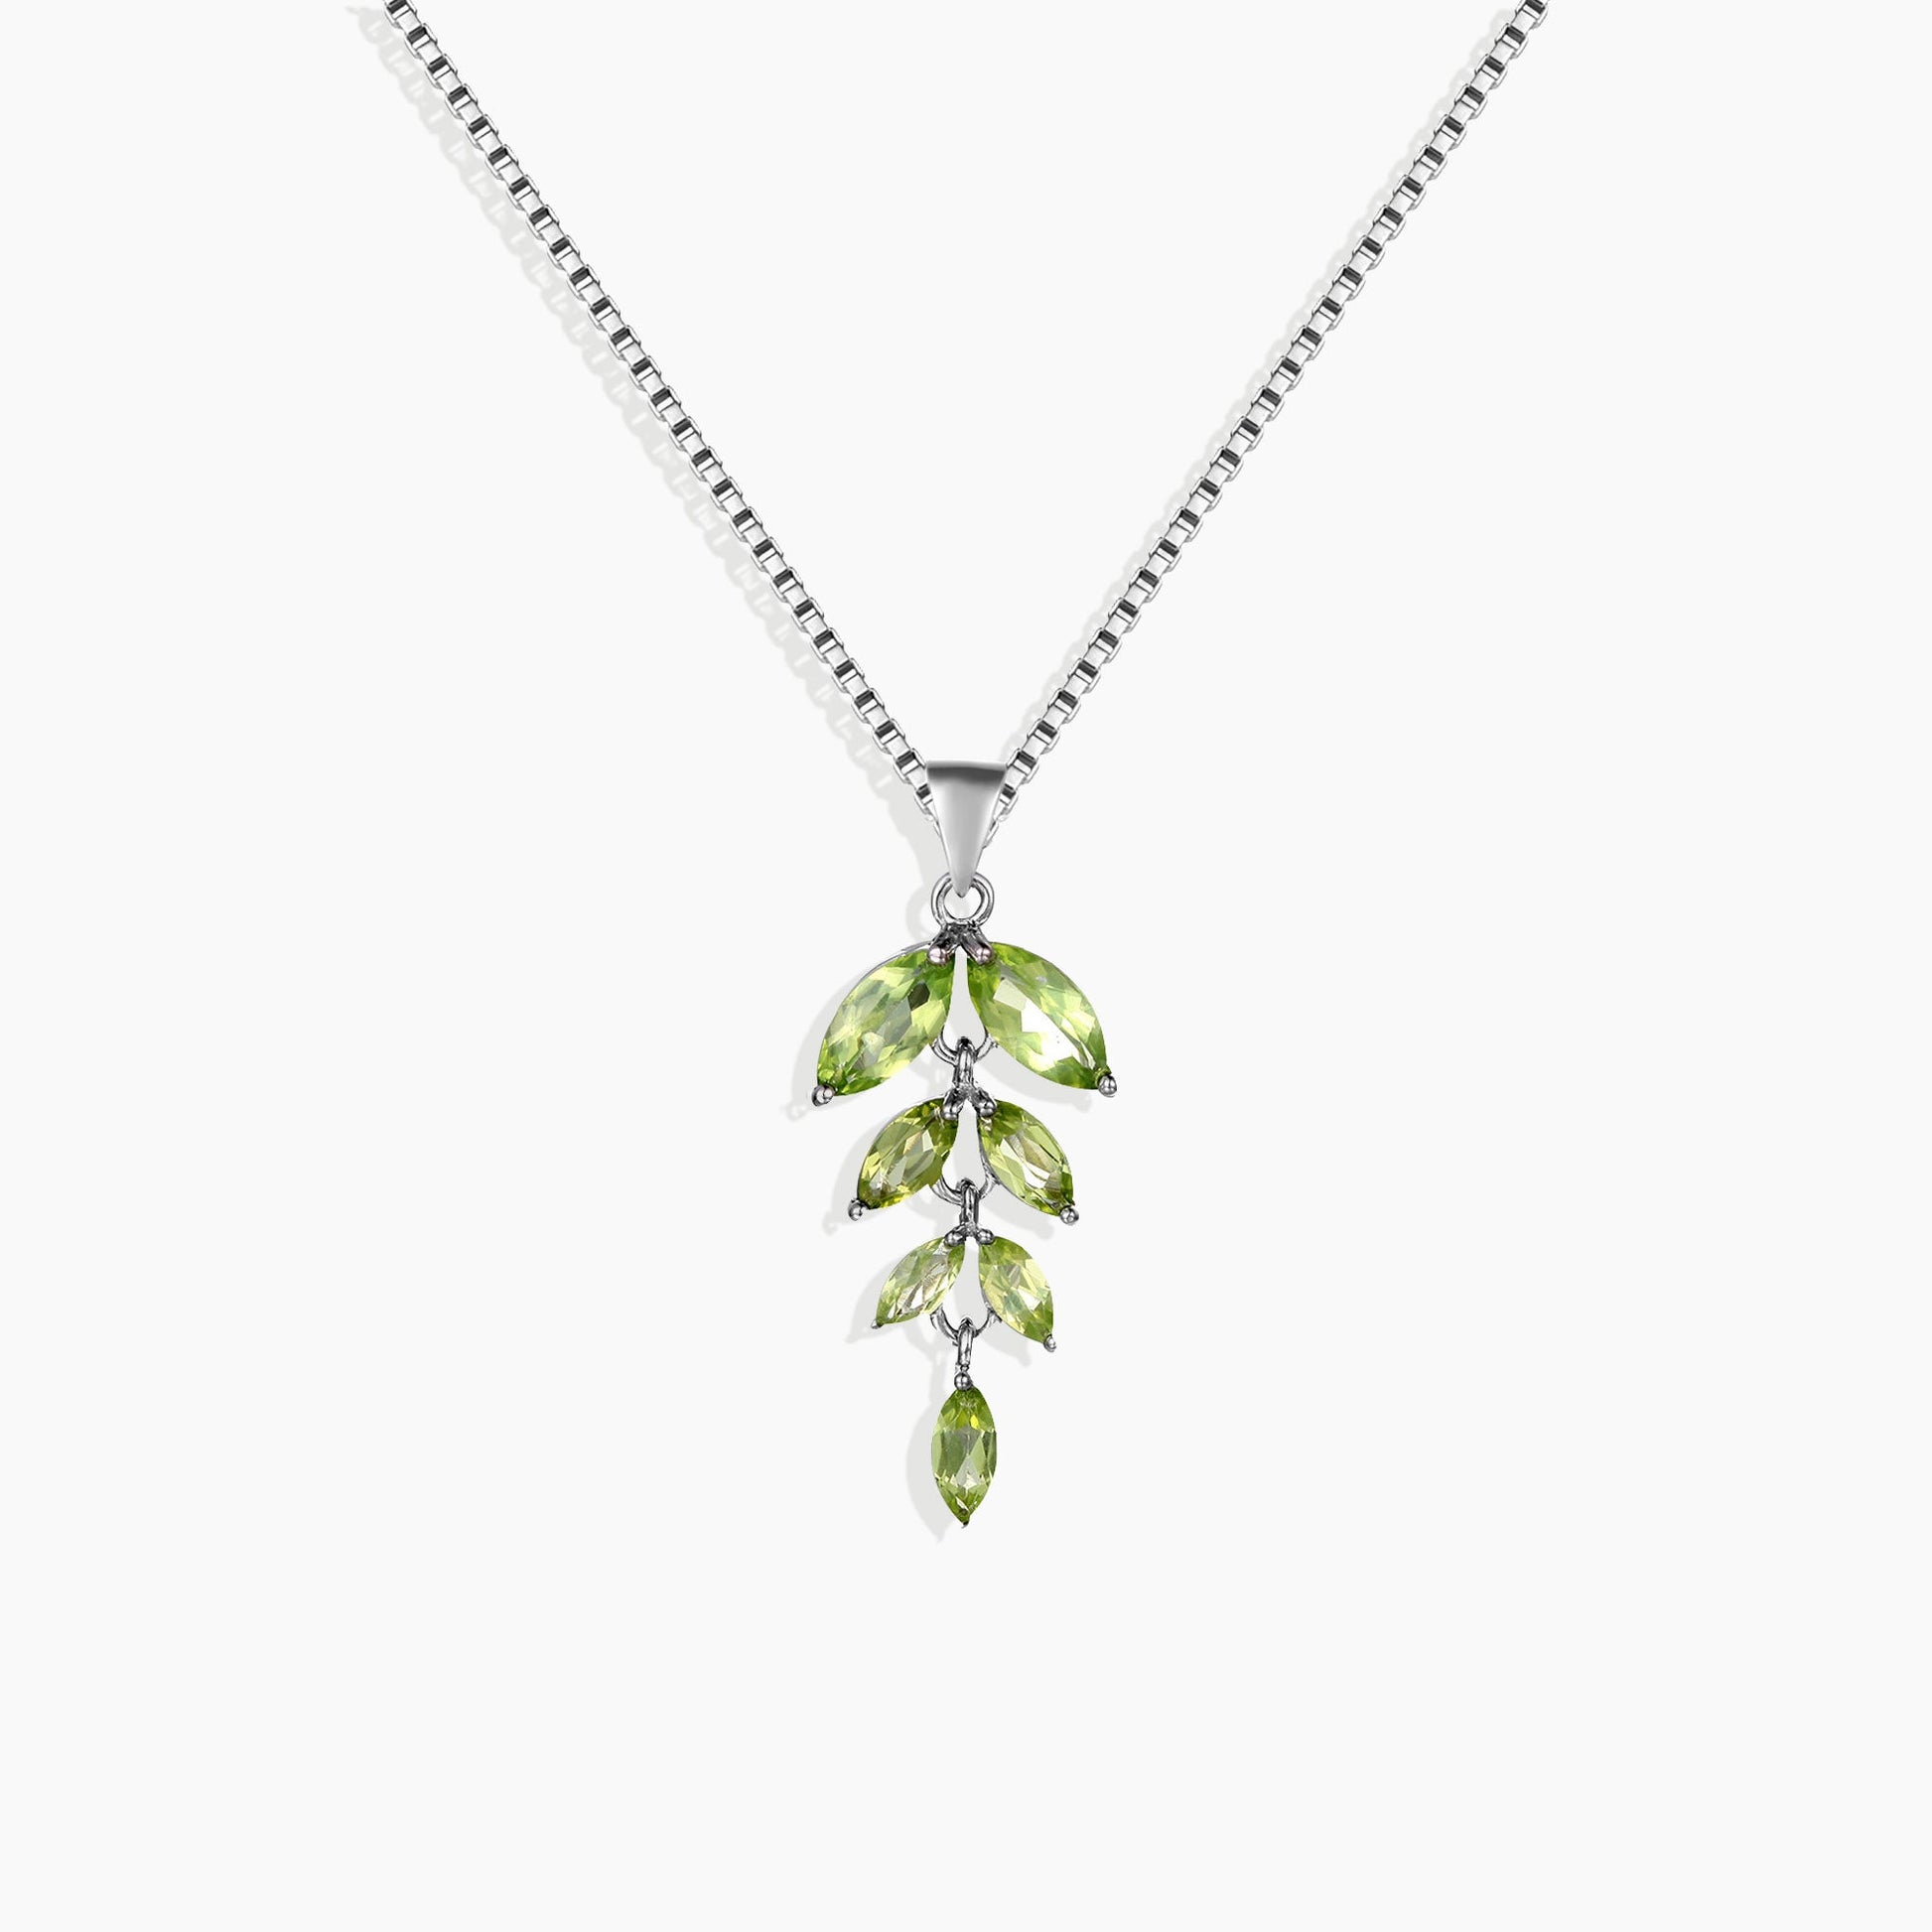 Front View: Peridot Leaf Pendant by Irosk